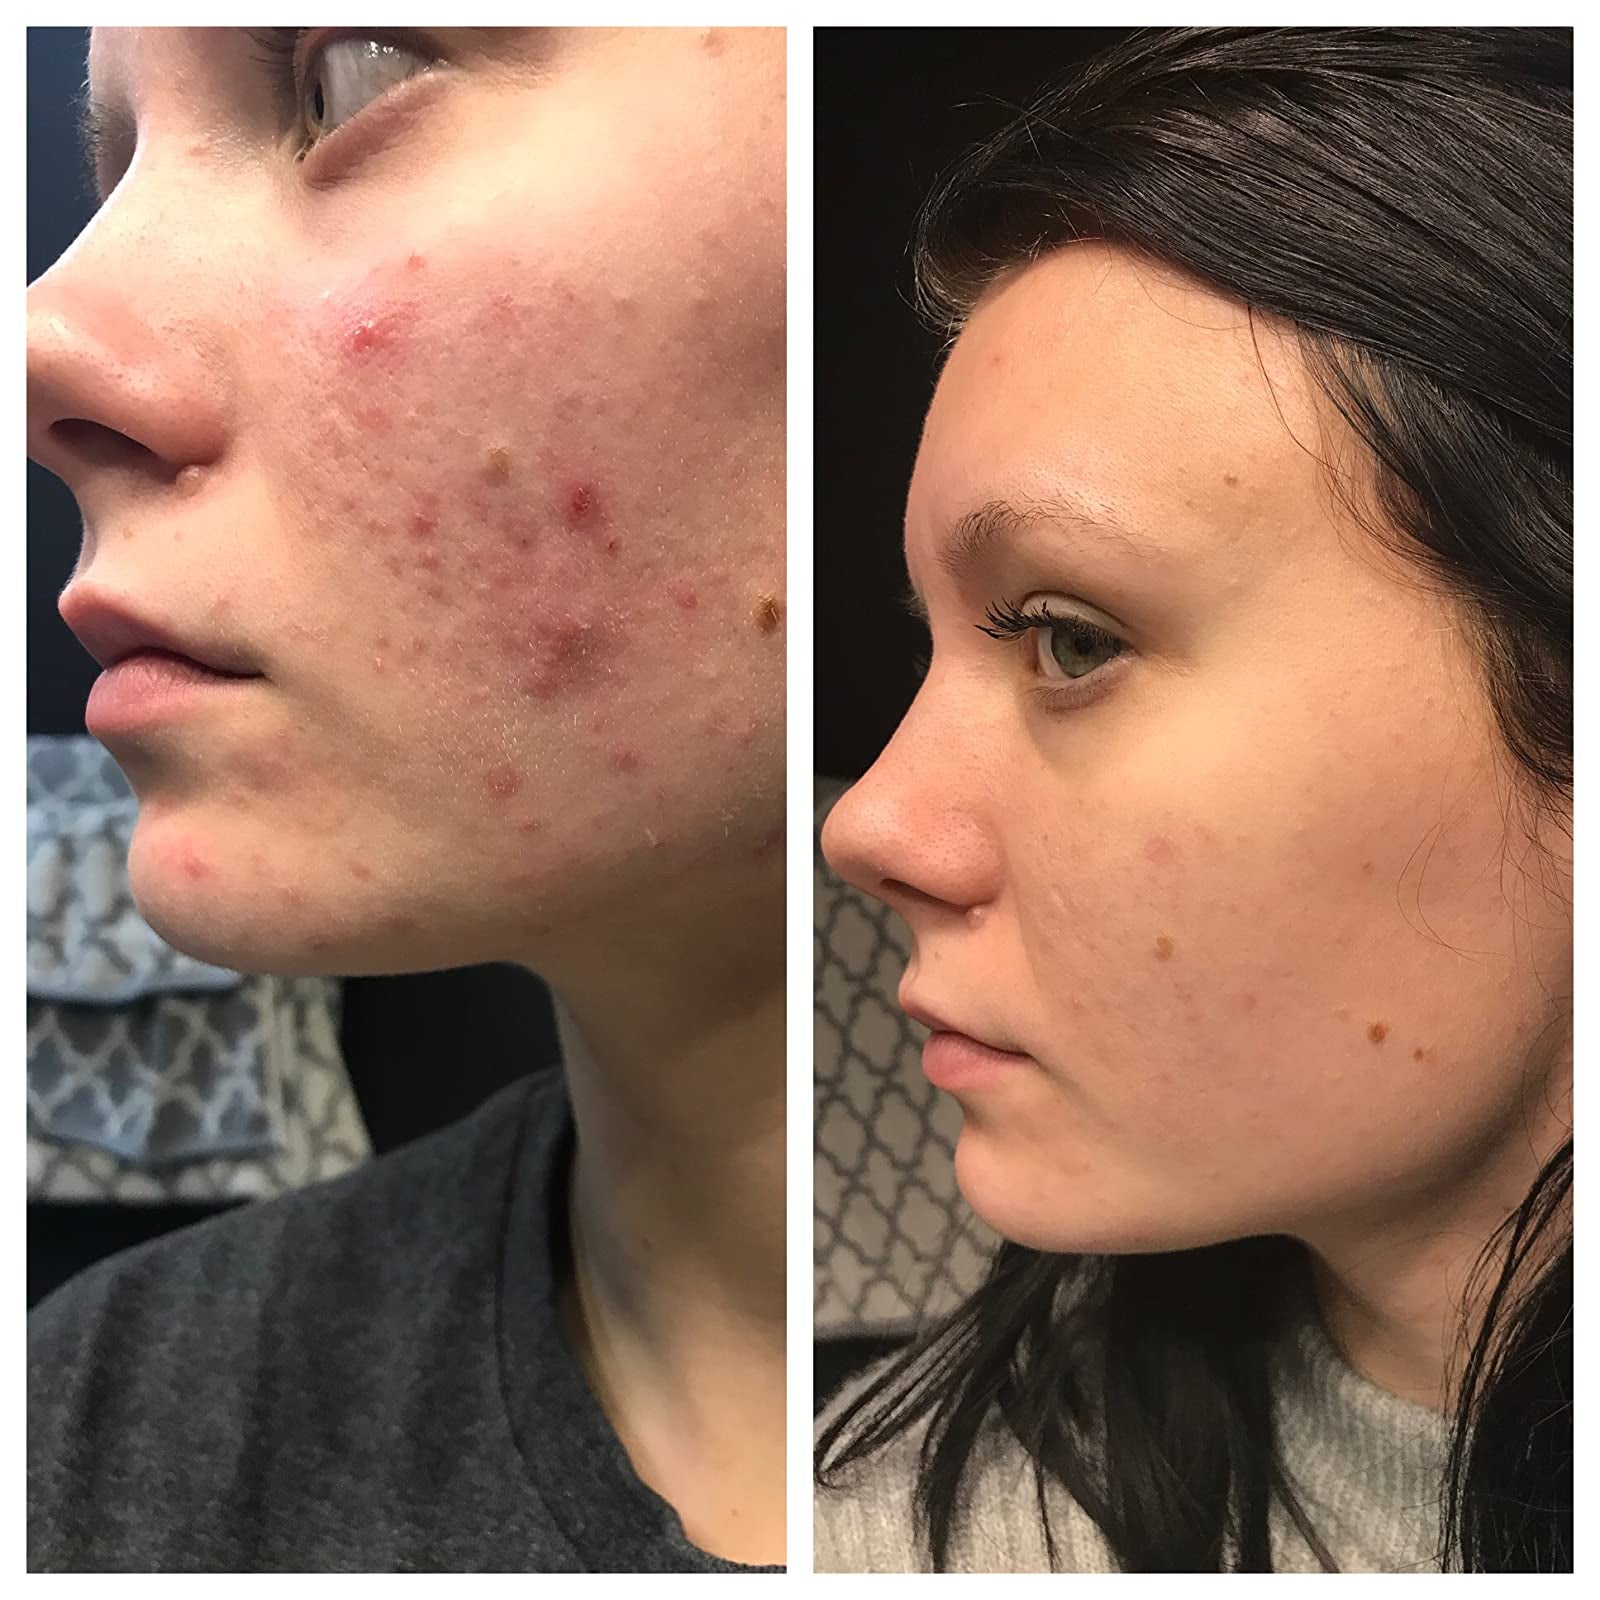 Reviewer showing results of using CeraVe hydrating cleanser